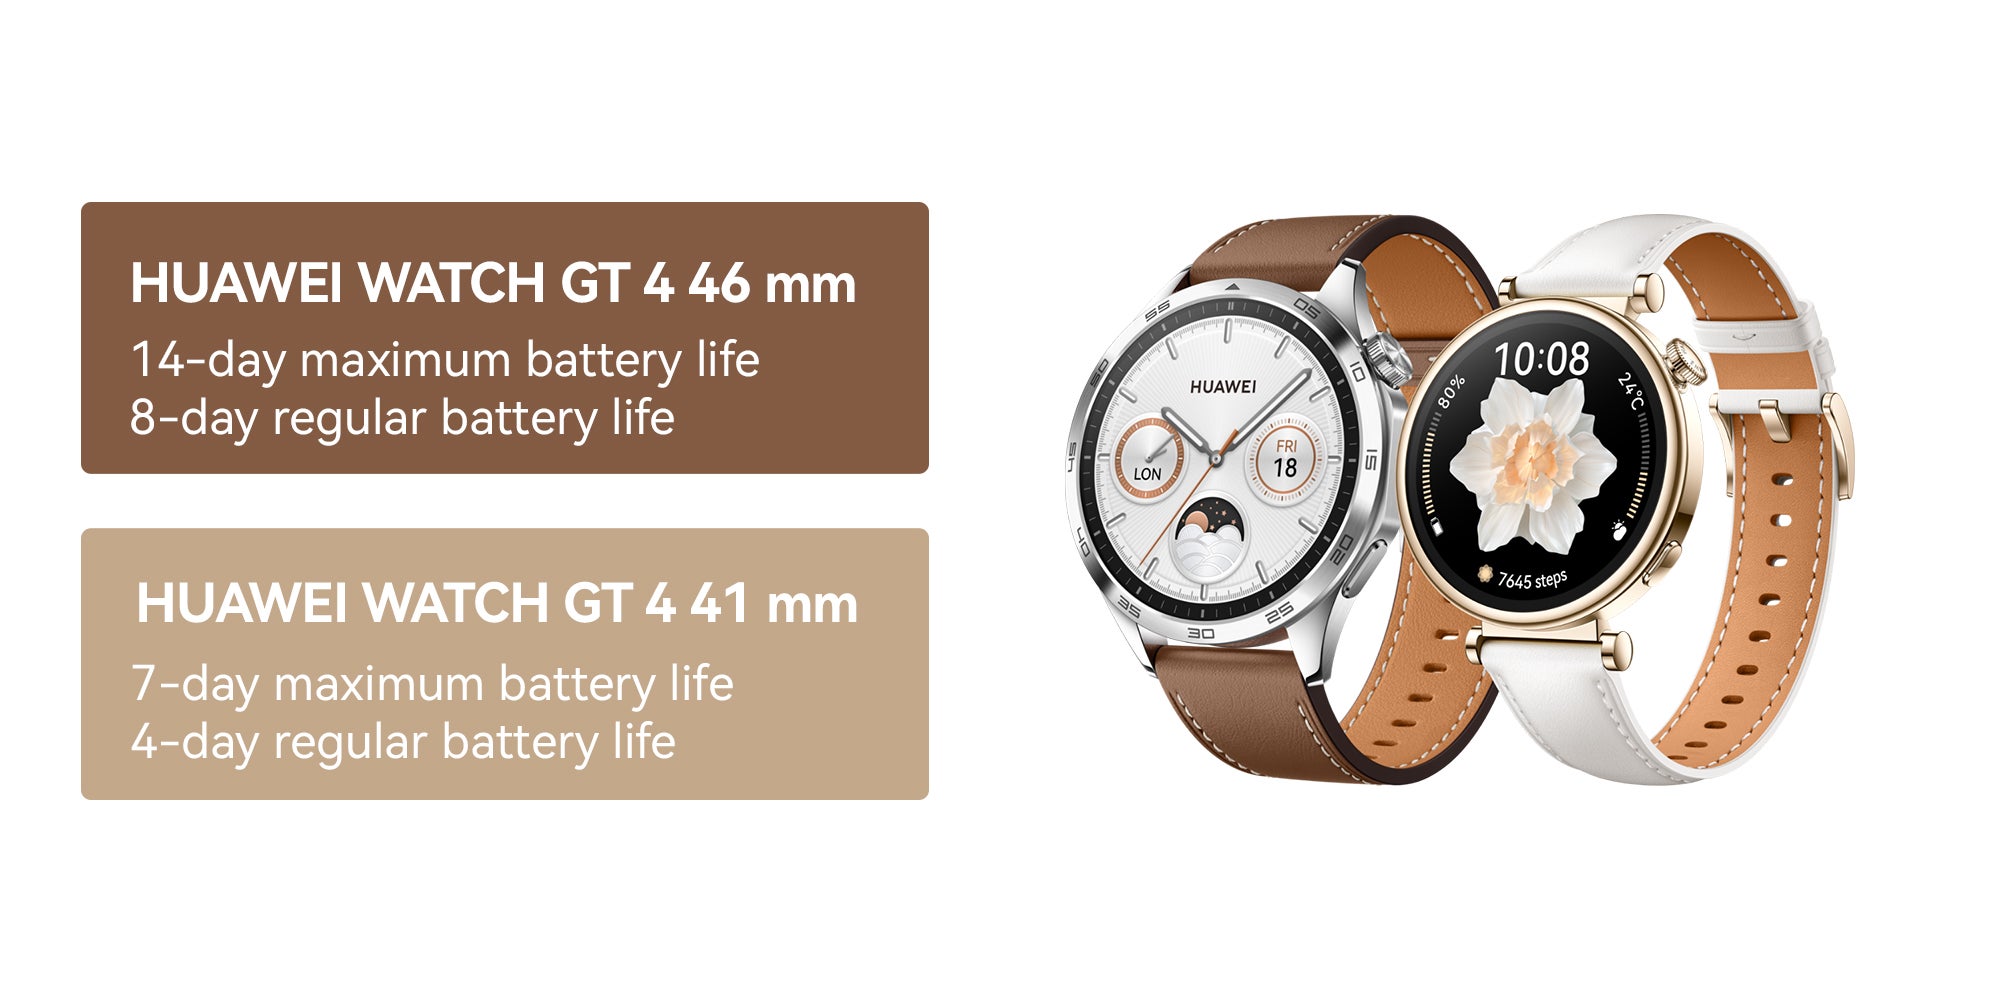 Watch GT 4 46mm Smartwatch, 14 Days Battery Life, Science-based Calorie Management, Dual-Band Five-System GNSS Position, Pulse Wave Arrhythmia Analysis, Heart Rate Monitor, Andriod And iOS Grey